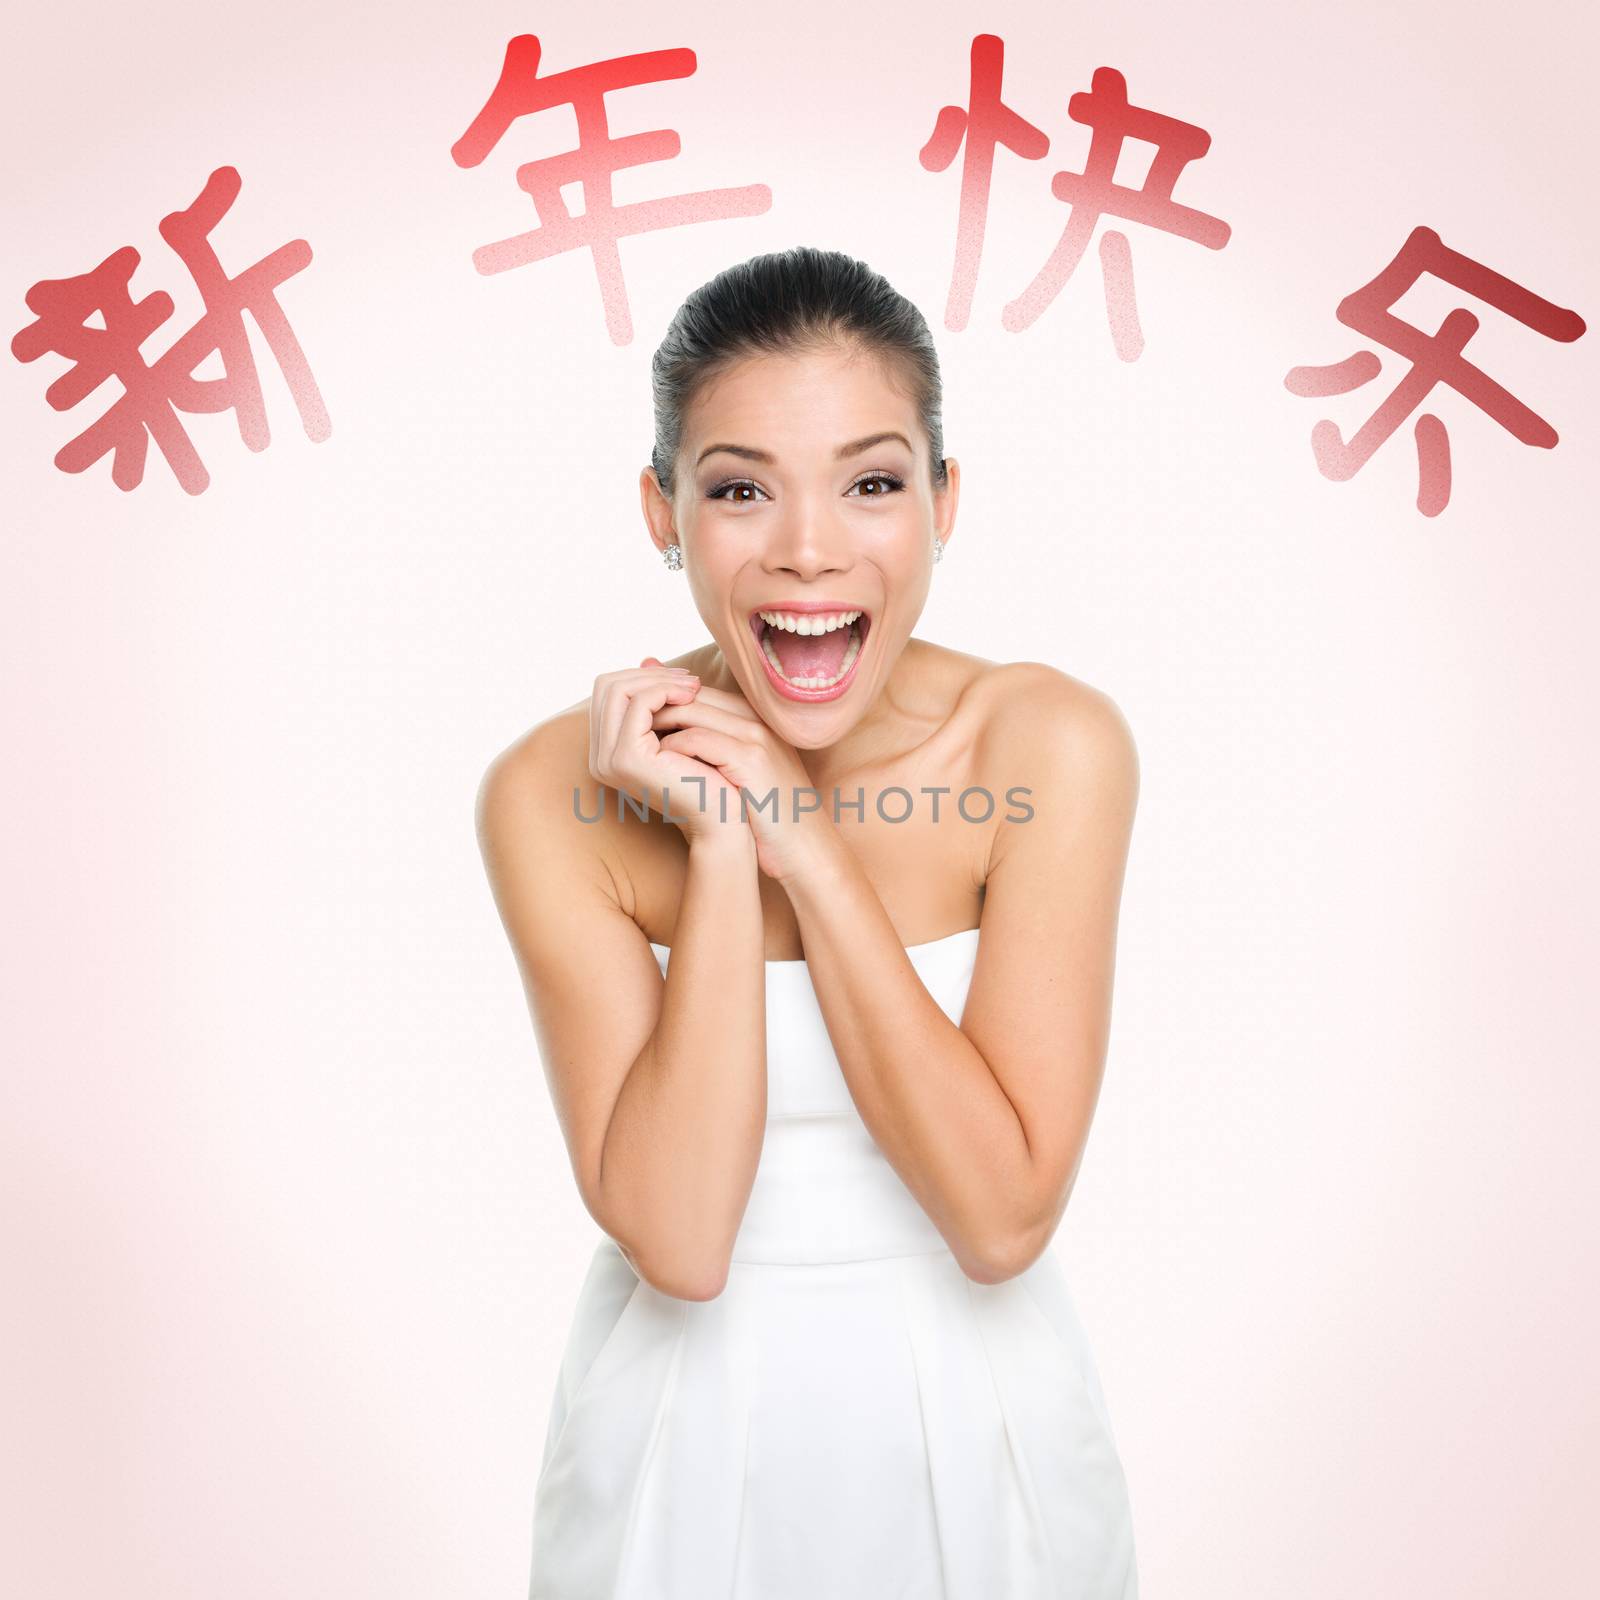 Happy Chinese New Year woman and red text with HAPPY CHINESE NEW YEAR written in Chinese on background. Beautiful mixed race Chinese Asian / Caucasian girl isolated excited and cheerful.